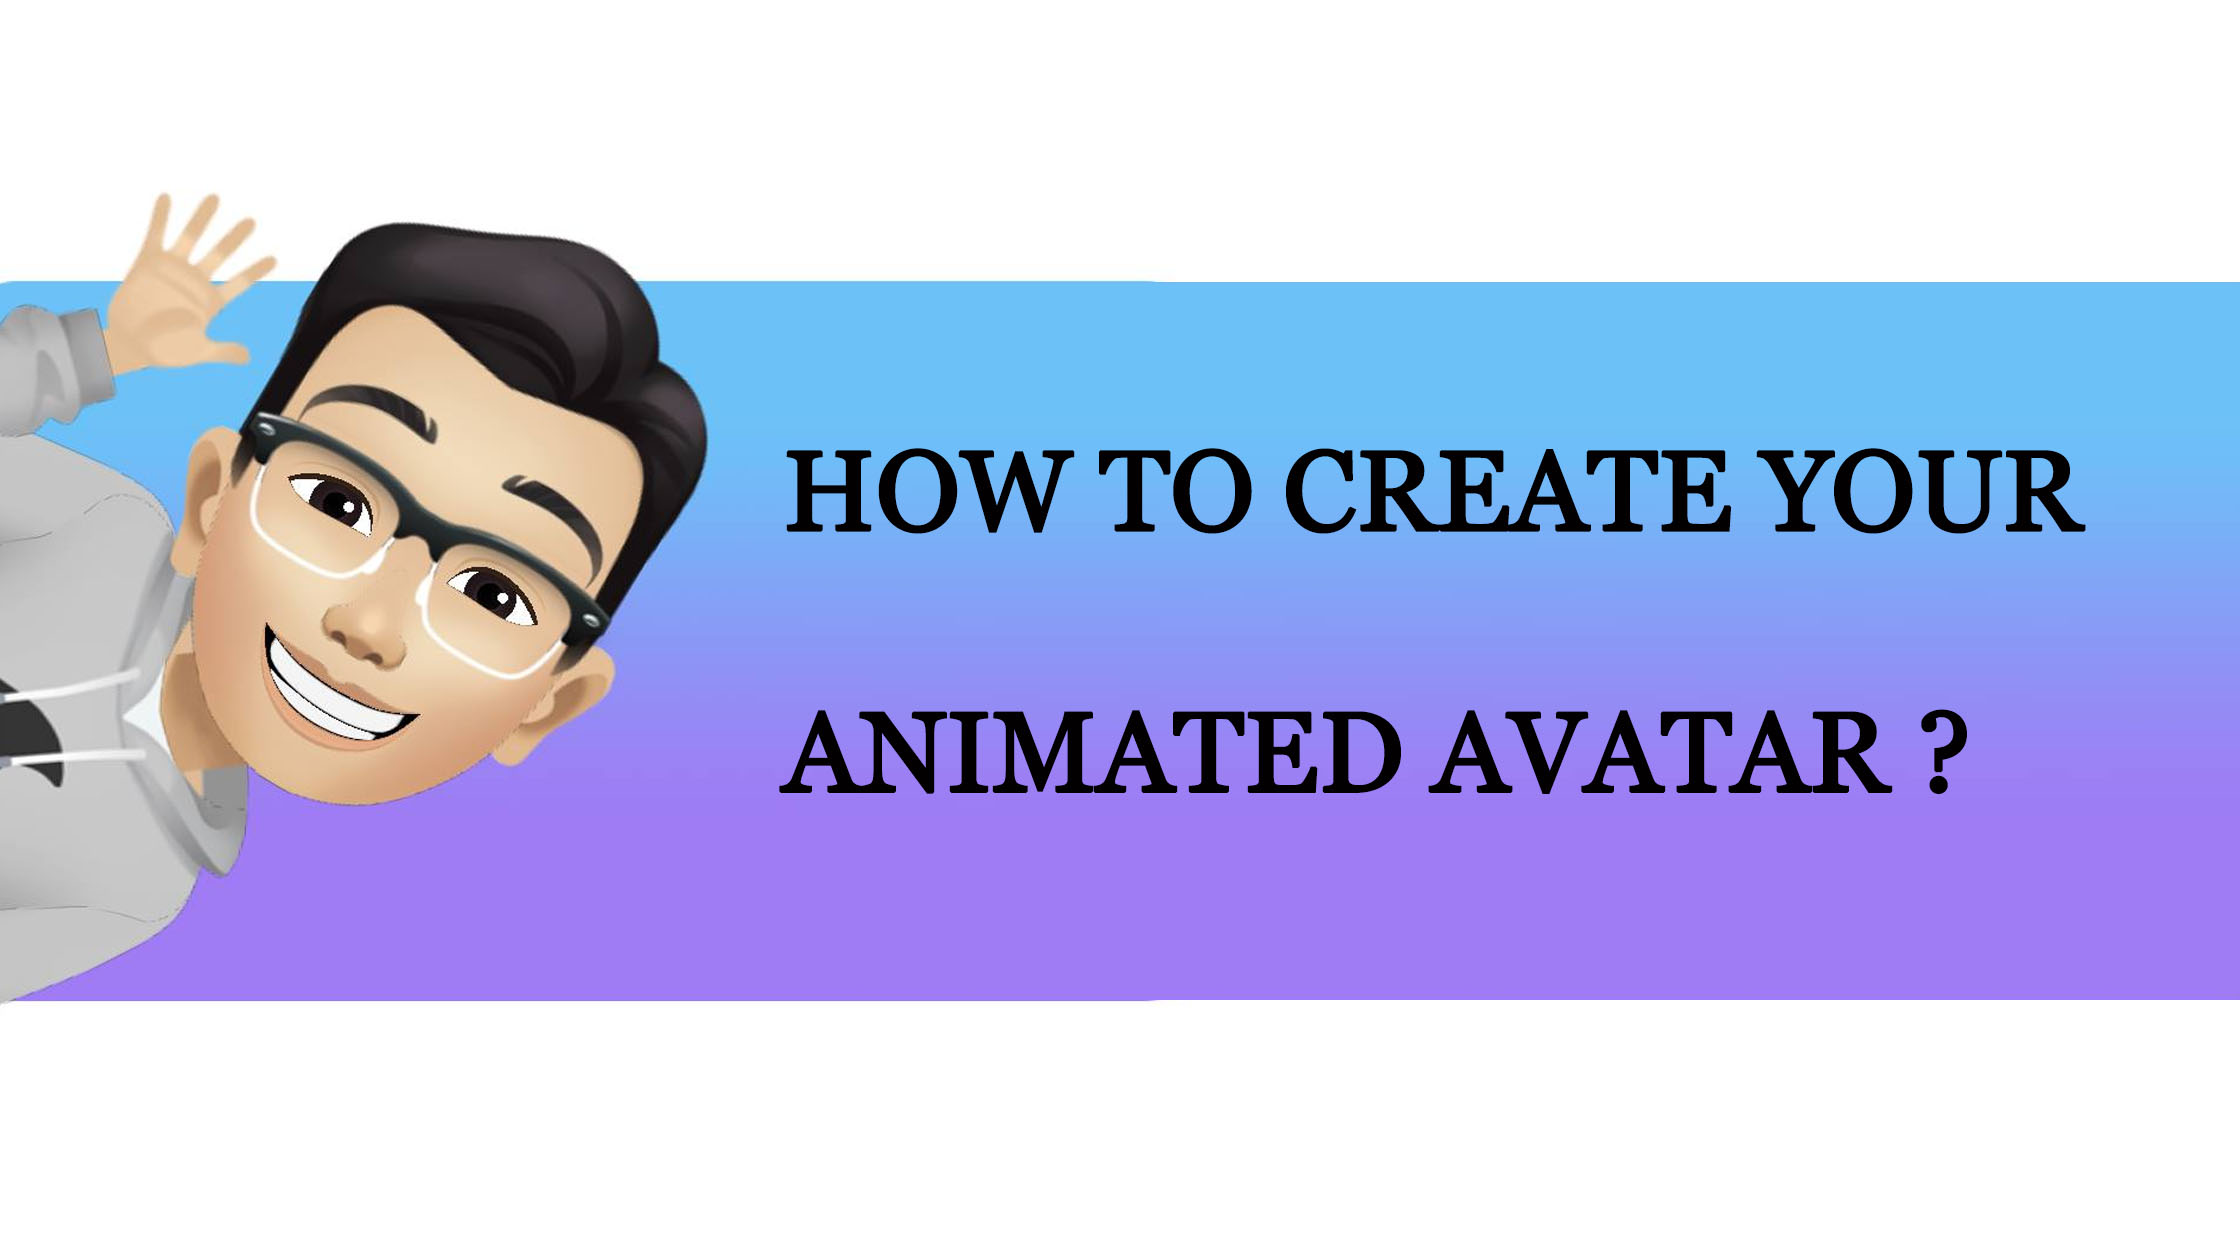 How to Make Animated Avatar of Yourself